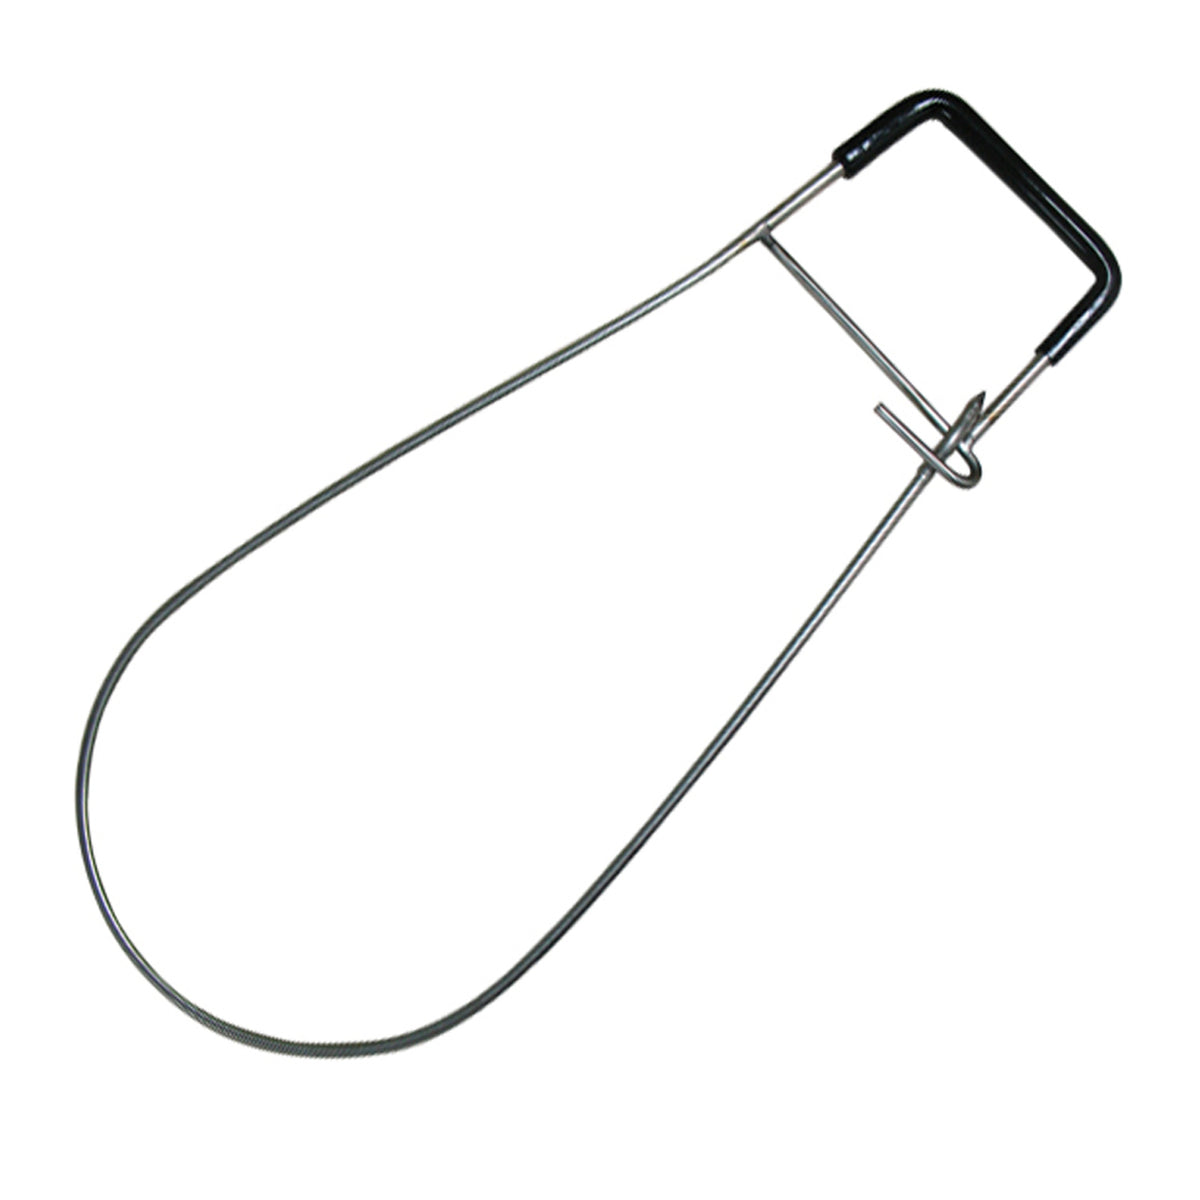 Buy Fish Stringer for Spearfishing with Coated Stainless Steel Cable and  Heavy Duty Carabiner Online at desertcartOMAN